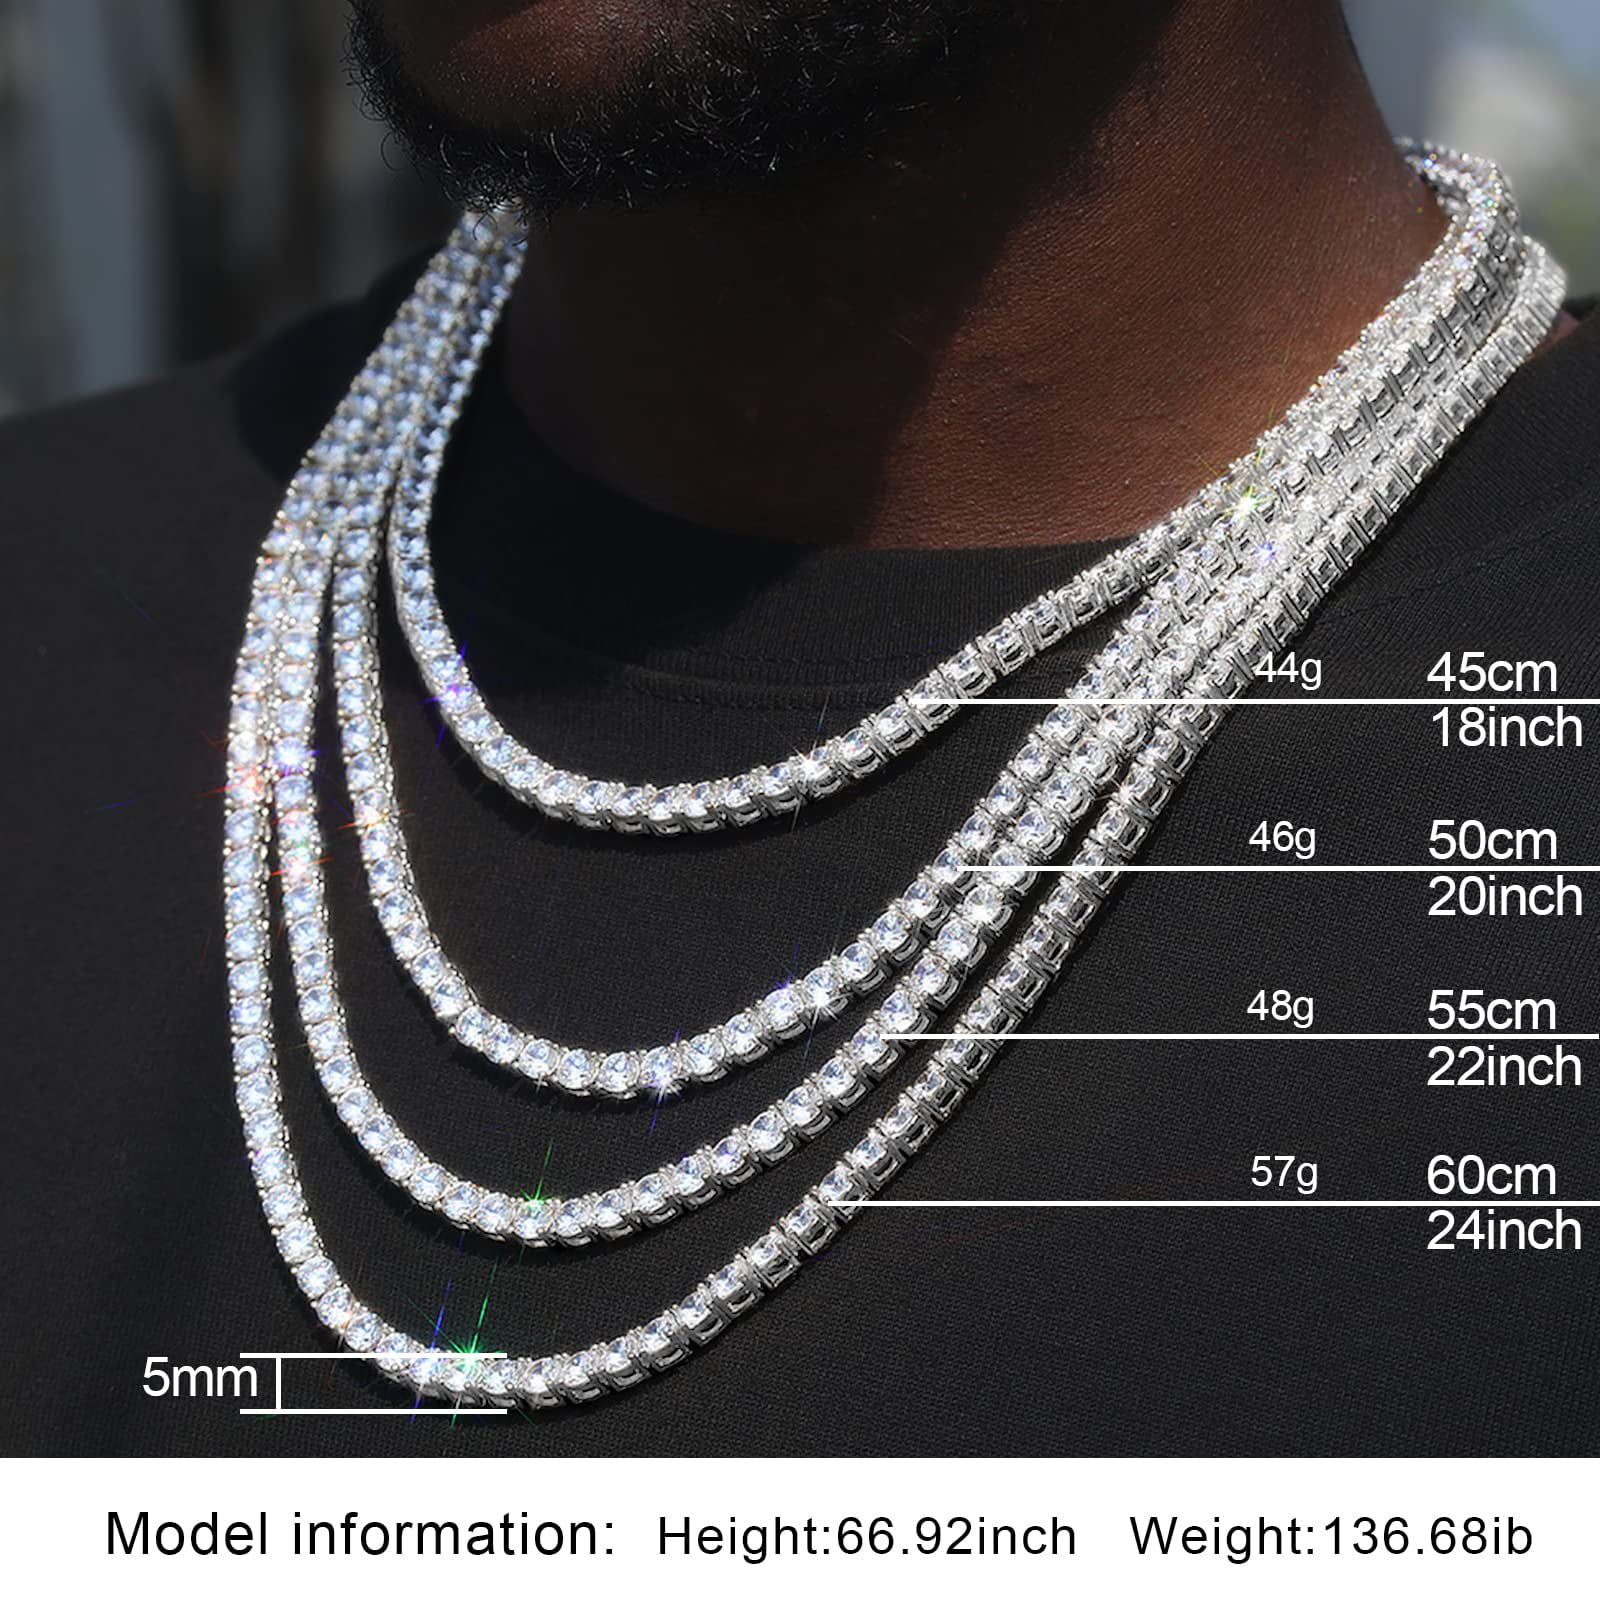 3 Prong Tennis Necklaces | Diamond Tennis Chain Necklace | 6 ICE, LLC